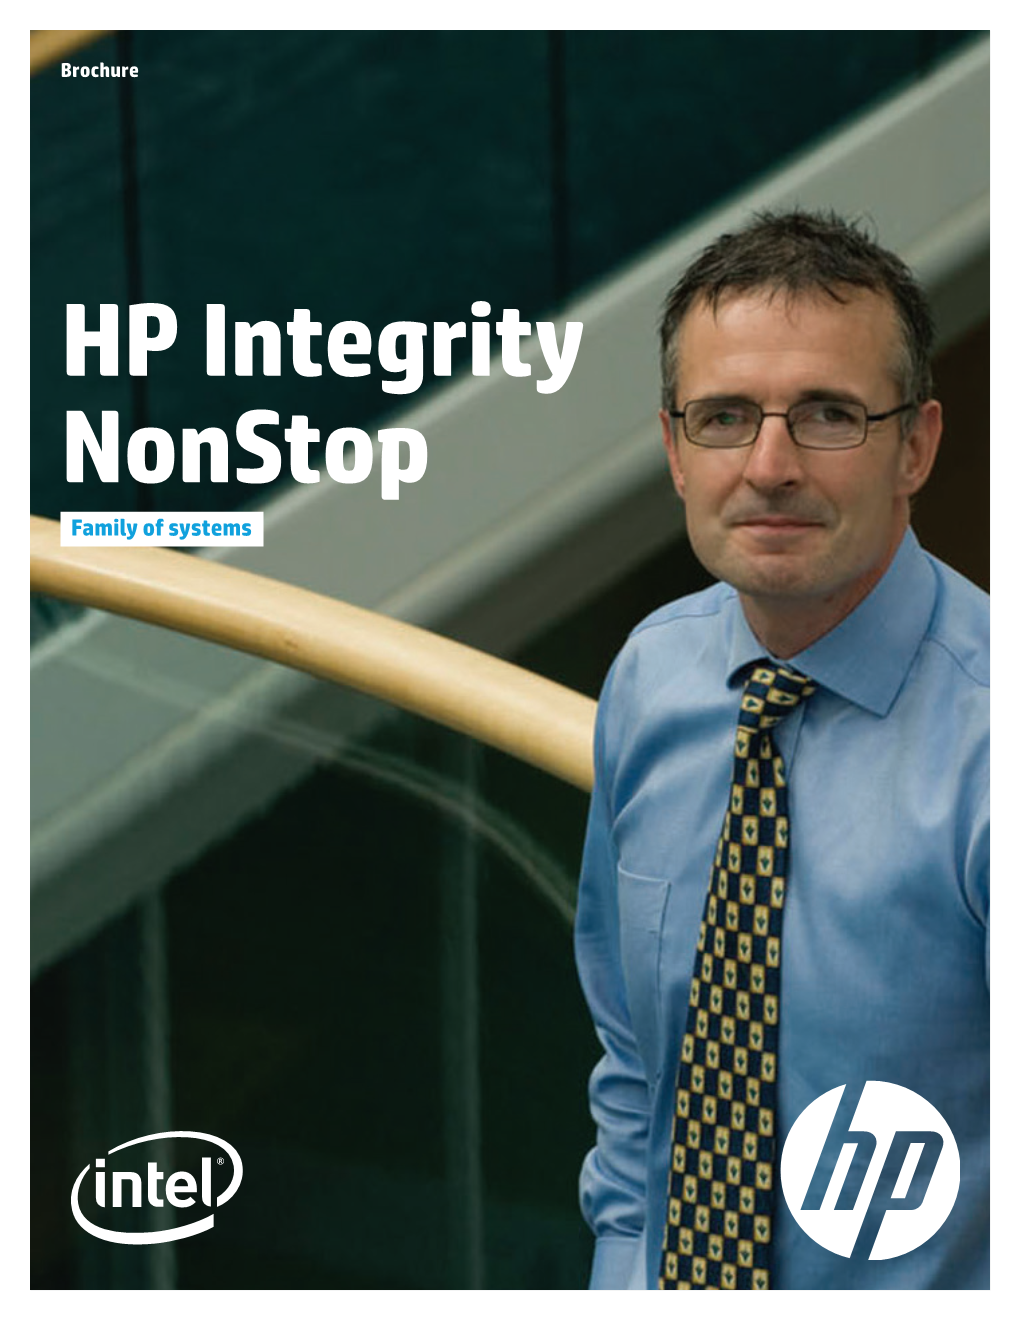 HP Integrity Nonstop Family of Systems Brochure | HP Integrity Nonstop HP Integrity Nonstop Family of Systems